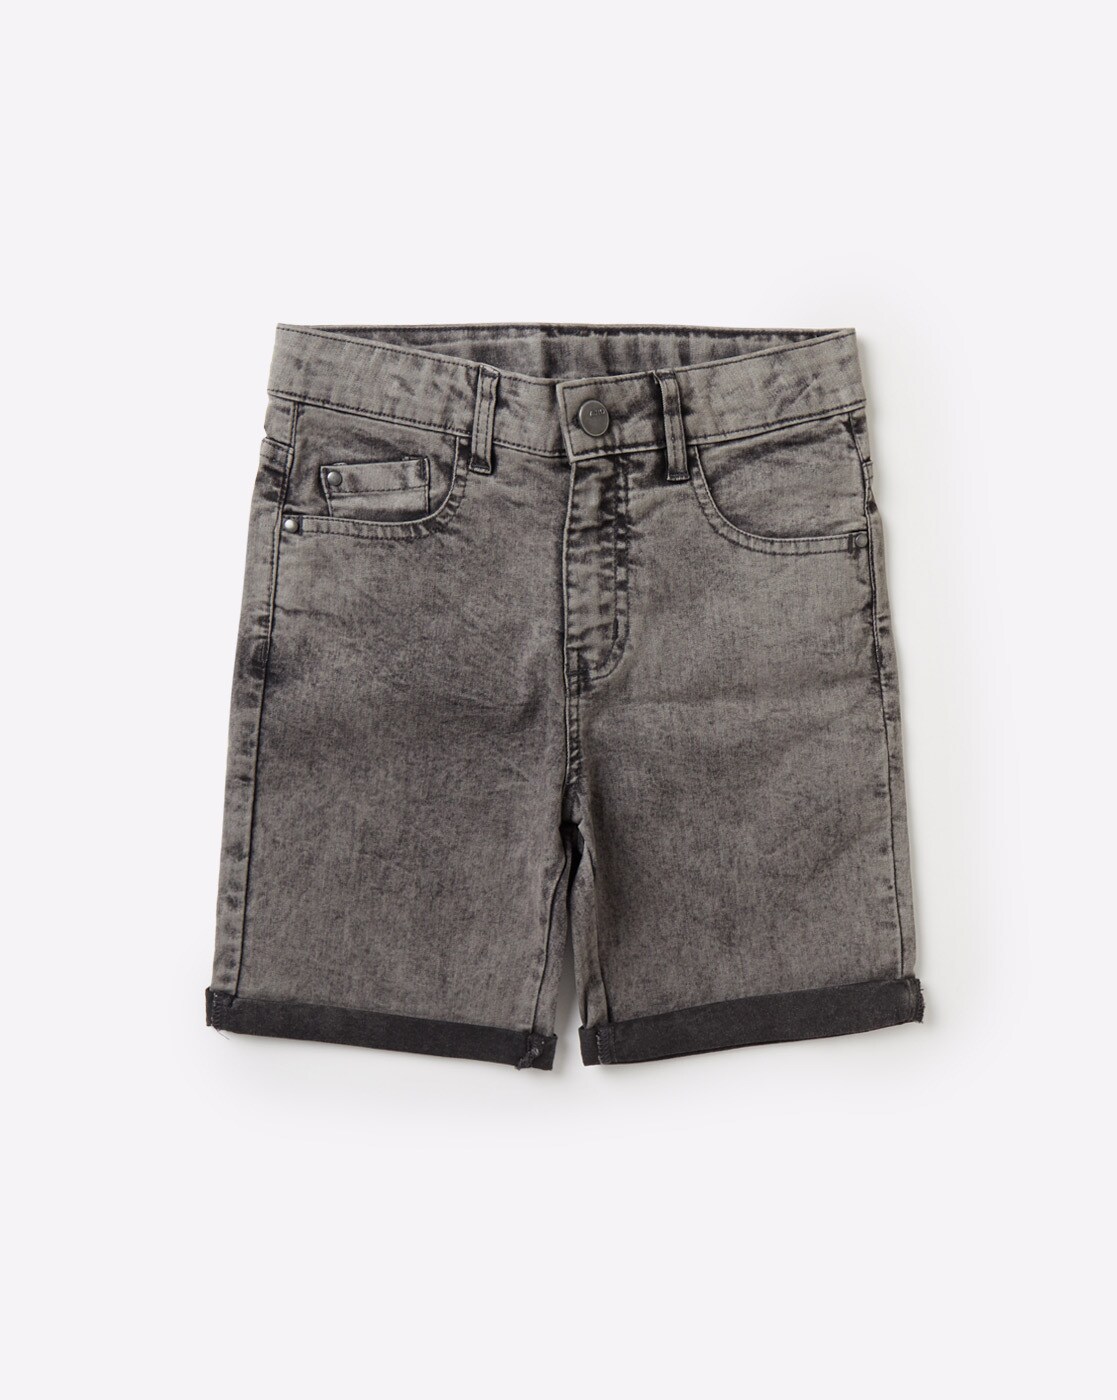 Three Fourth Shorts Jeans  Buy Three Fourth Shorts Jeans online in India